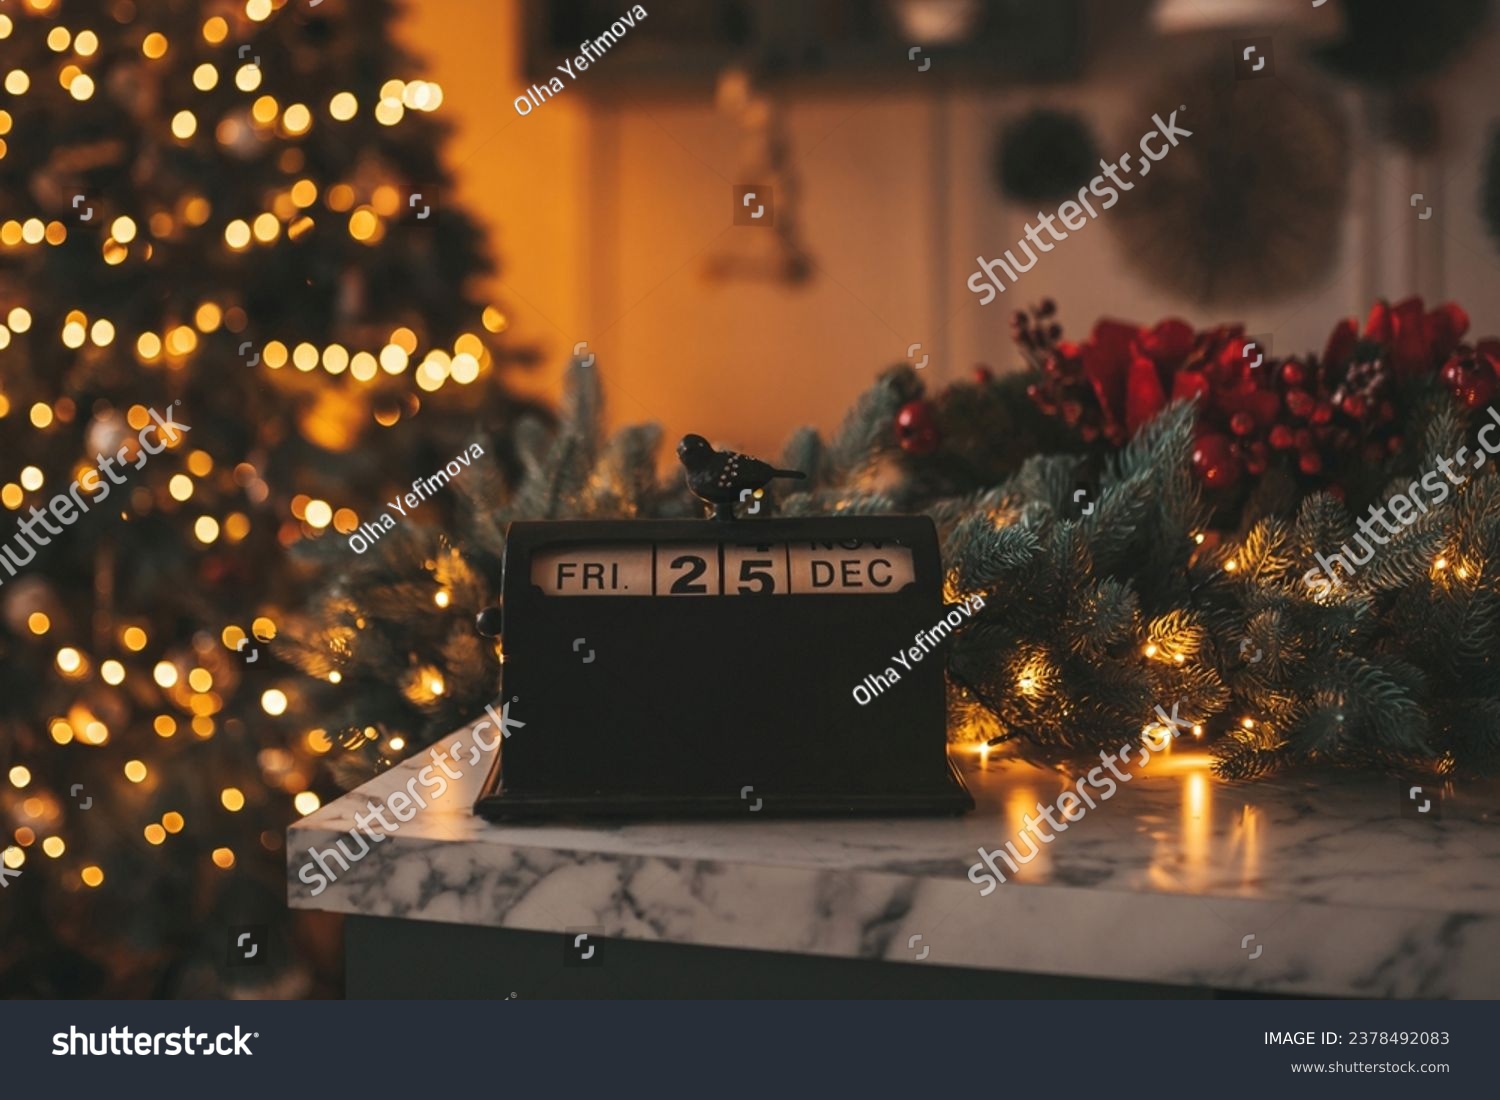 Merry christmas day 25 december eve event fairytale vibes. Sparkling bokeh garland shiny glister twinkle lights Noel tree decorations wooden cube calendar festive candles winter holidays spirit Xmas #2378492083